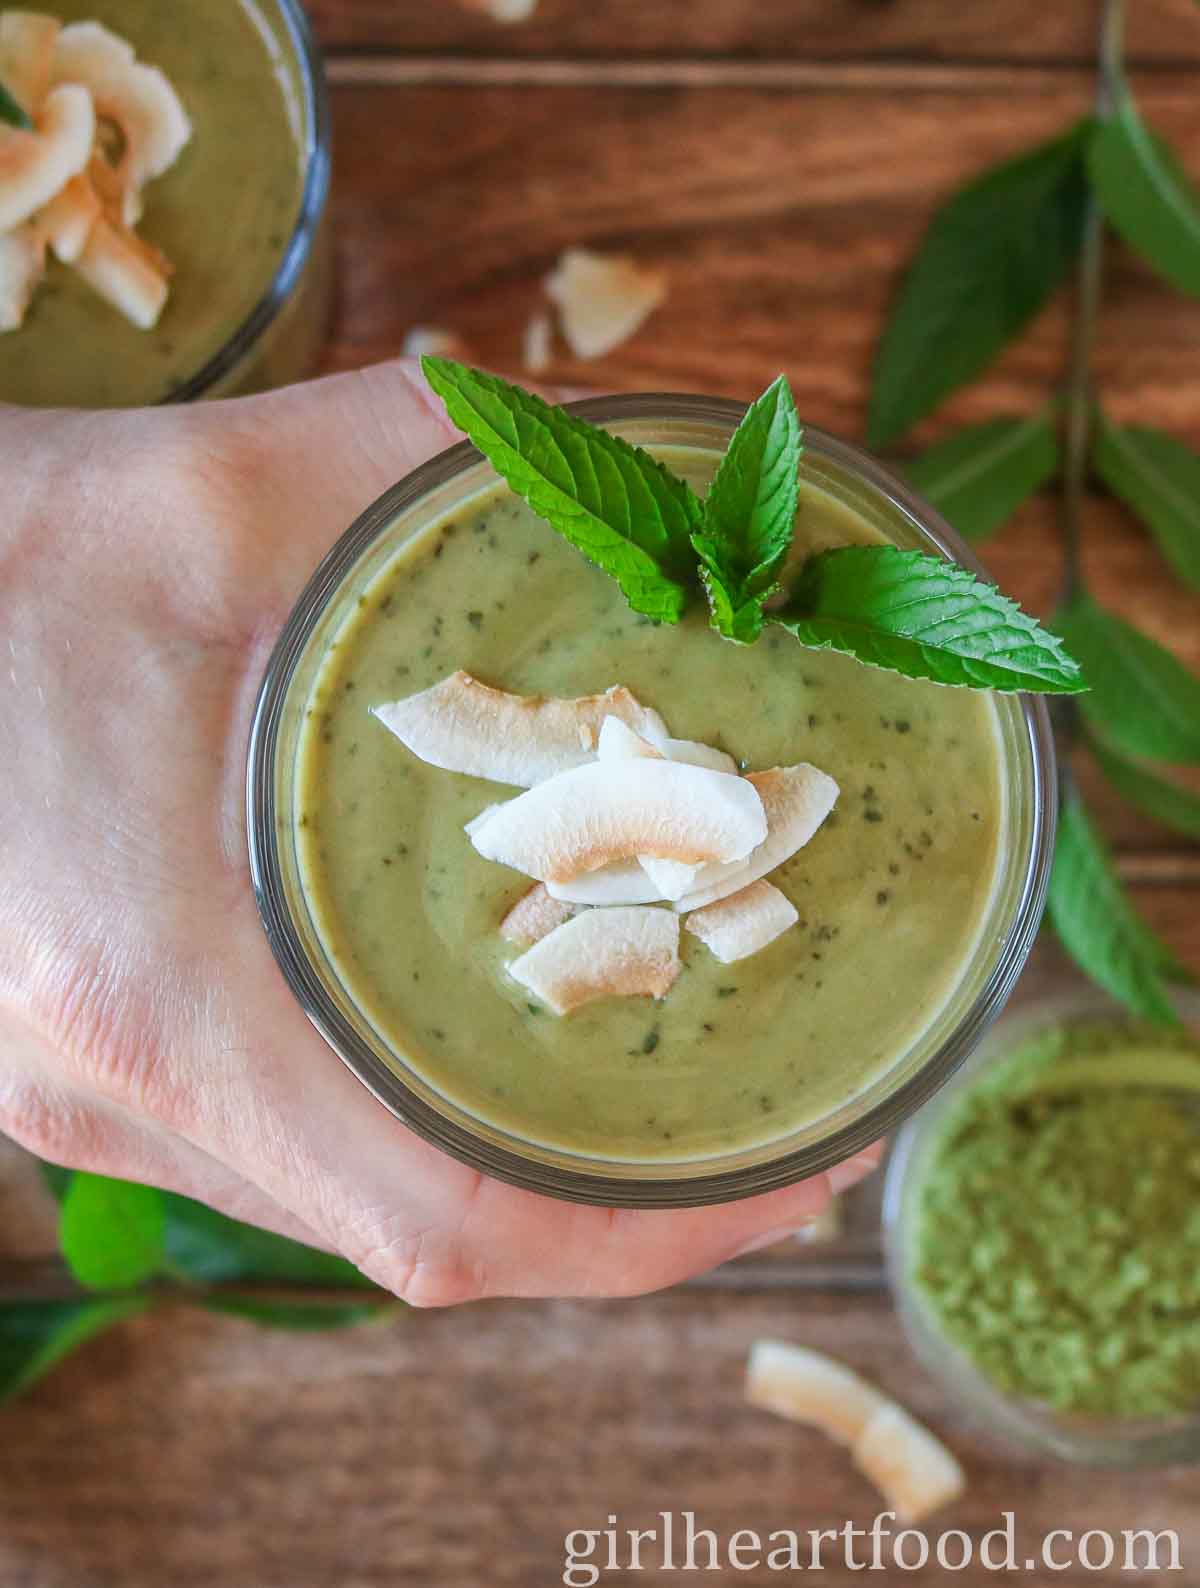 Hand holding a glass of matcha smoothie.